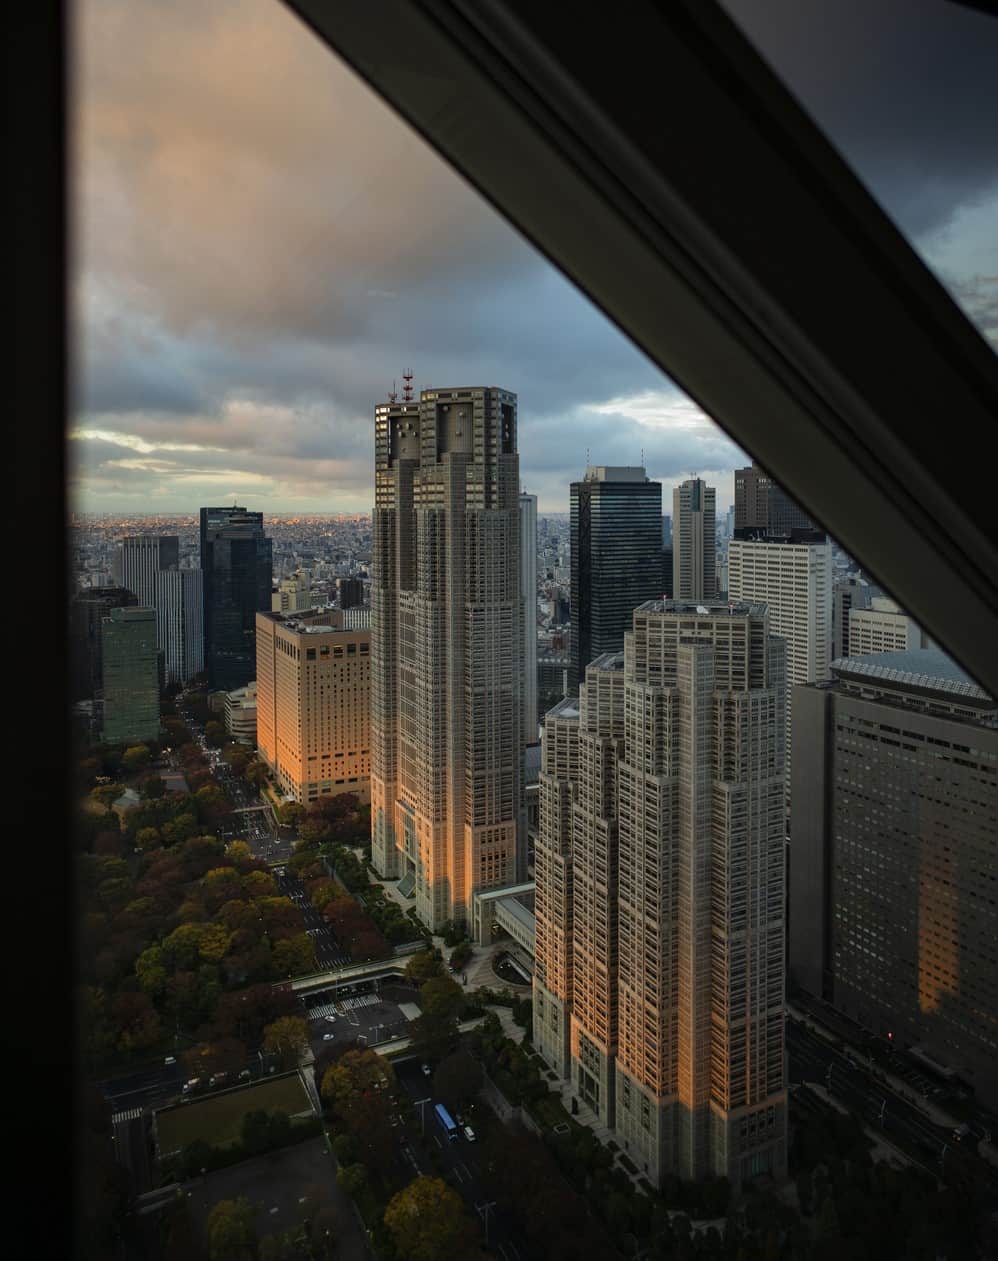 Park Hyatt Tokyo / パーク ハイアット東京のインスタグラム：「The famed Tokyo Metropolitan Government Building, which can be seen from Park Hyatt Tokyo, shares a trait with the hotel; both were designed by famous architect Kenzo Tange. See the government building set against the autumn sky from the hotel's vantage point.  Share your own images with us by tagging @parkhyatttokyo  ————————————————————— #parkhyatttokyo #parkhyatt #discovertokyo #skyscraper #archtecture #kenzotange #tangekenzo  #autumnsky #viewsfromhotel #パークハイアット東京 ＃都庁 #丹下健三 #秋空  @shumpeiohsugi_photographer」